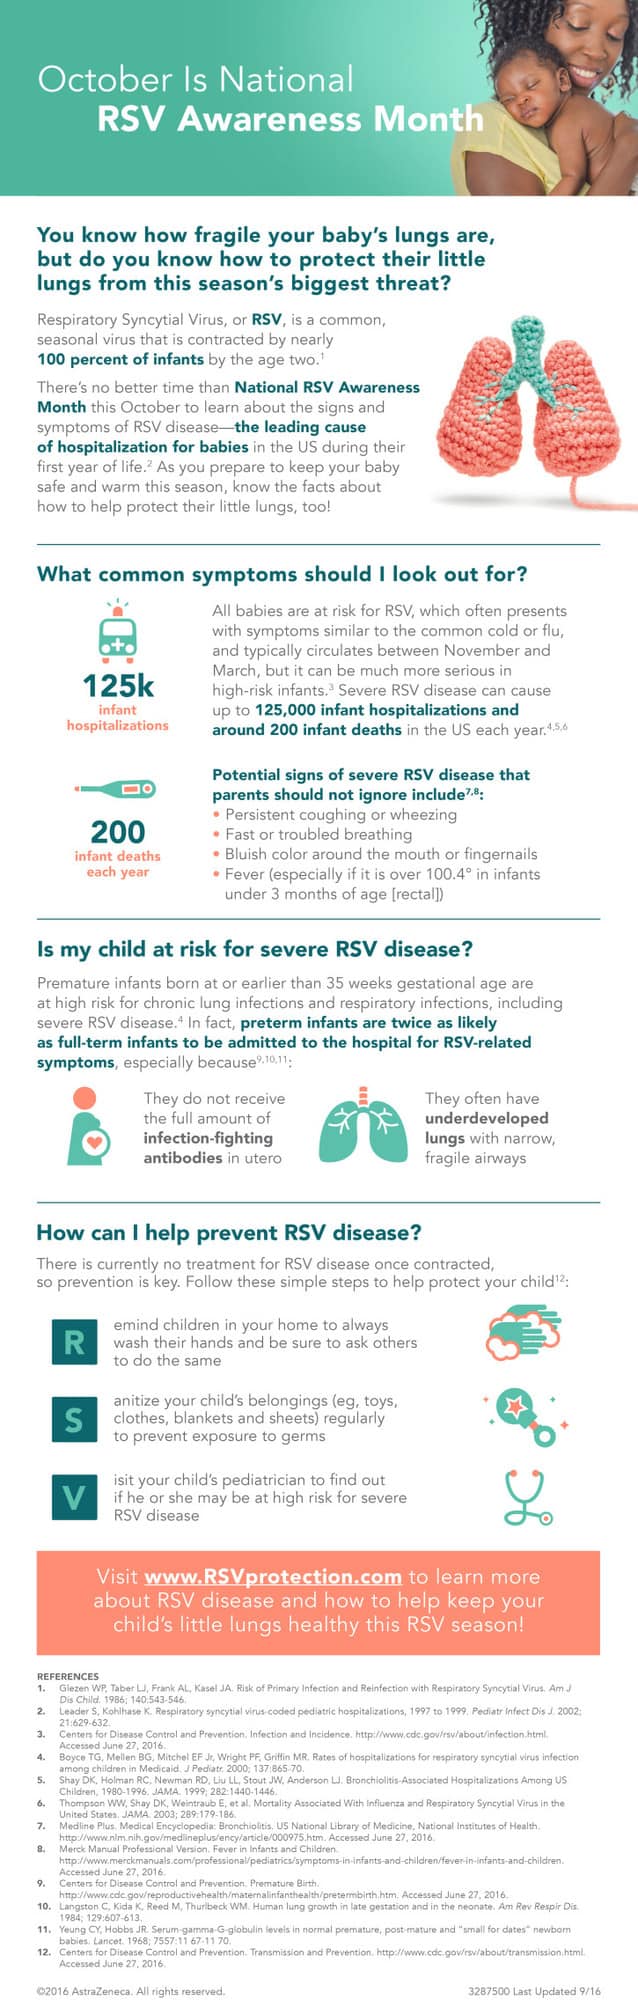 YL_EDLA051_RSVAwareness_Infographic_Update_Rd5a.ai